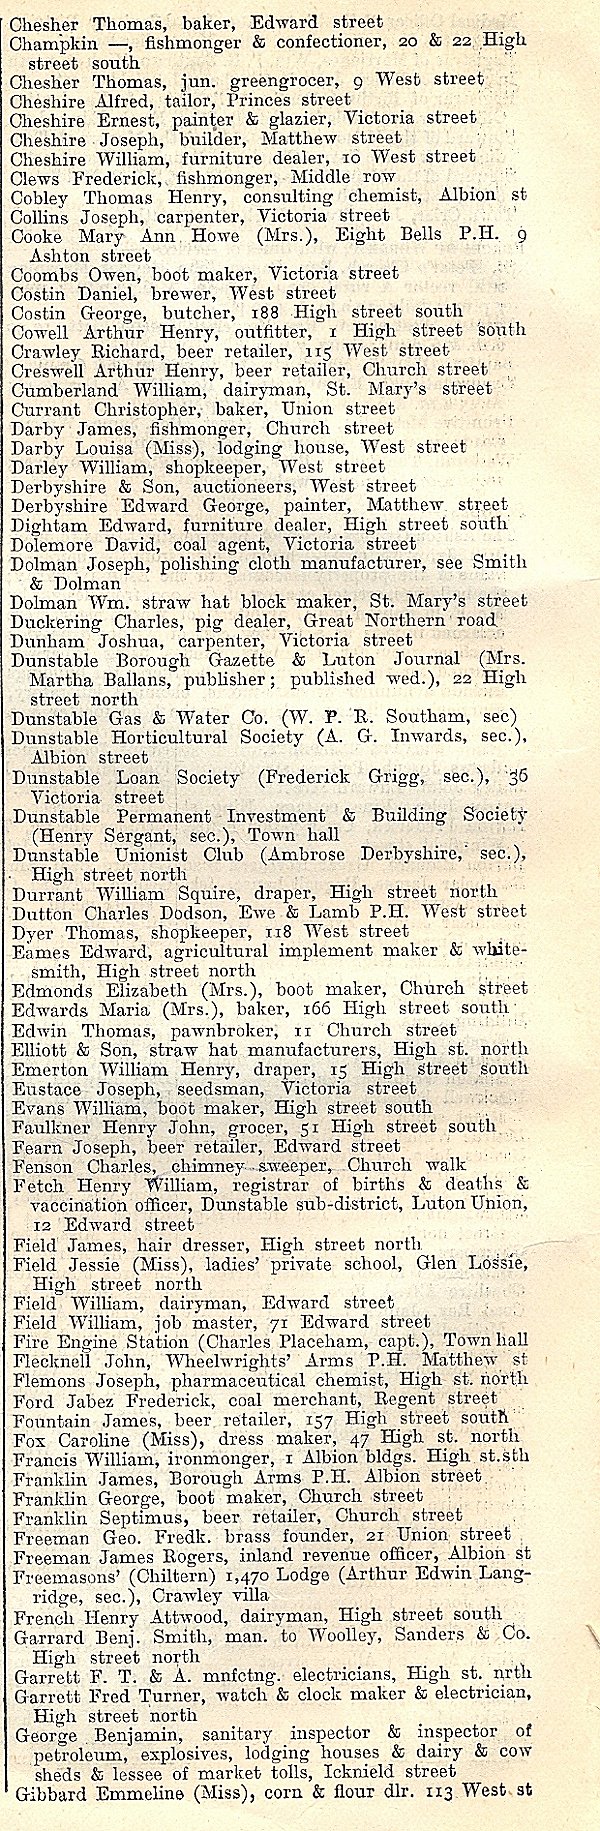 Dunstable, from Kellys Directory 1894, page 66, enlarged text